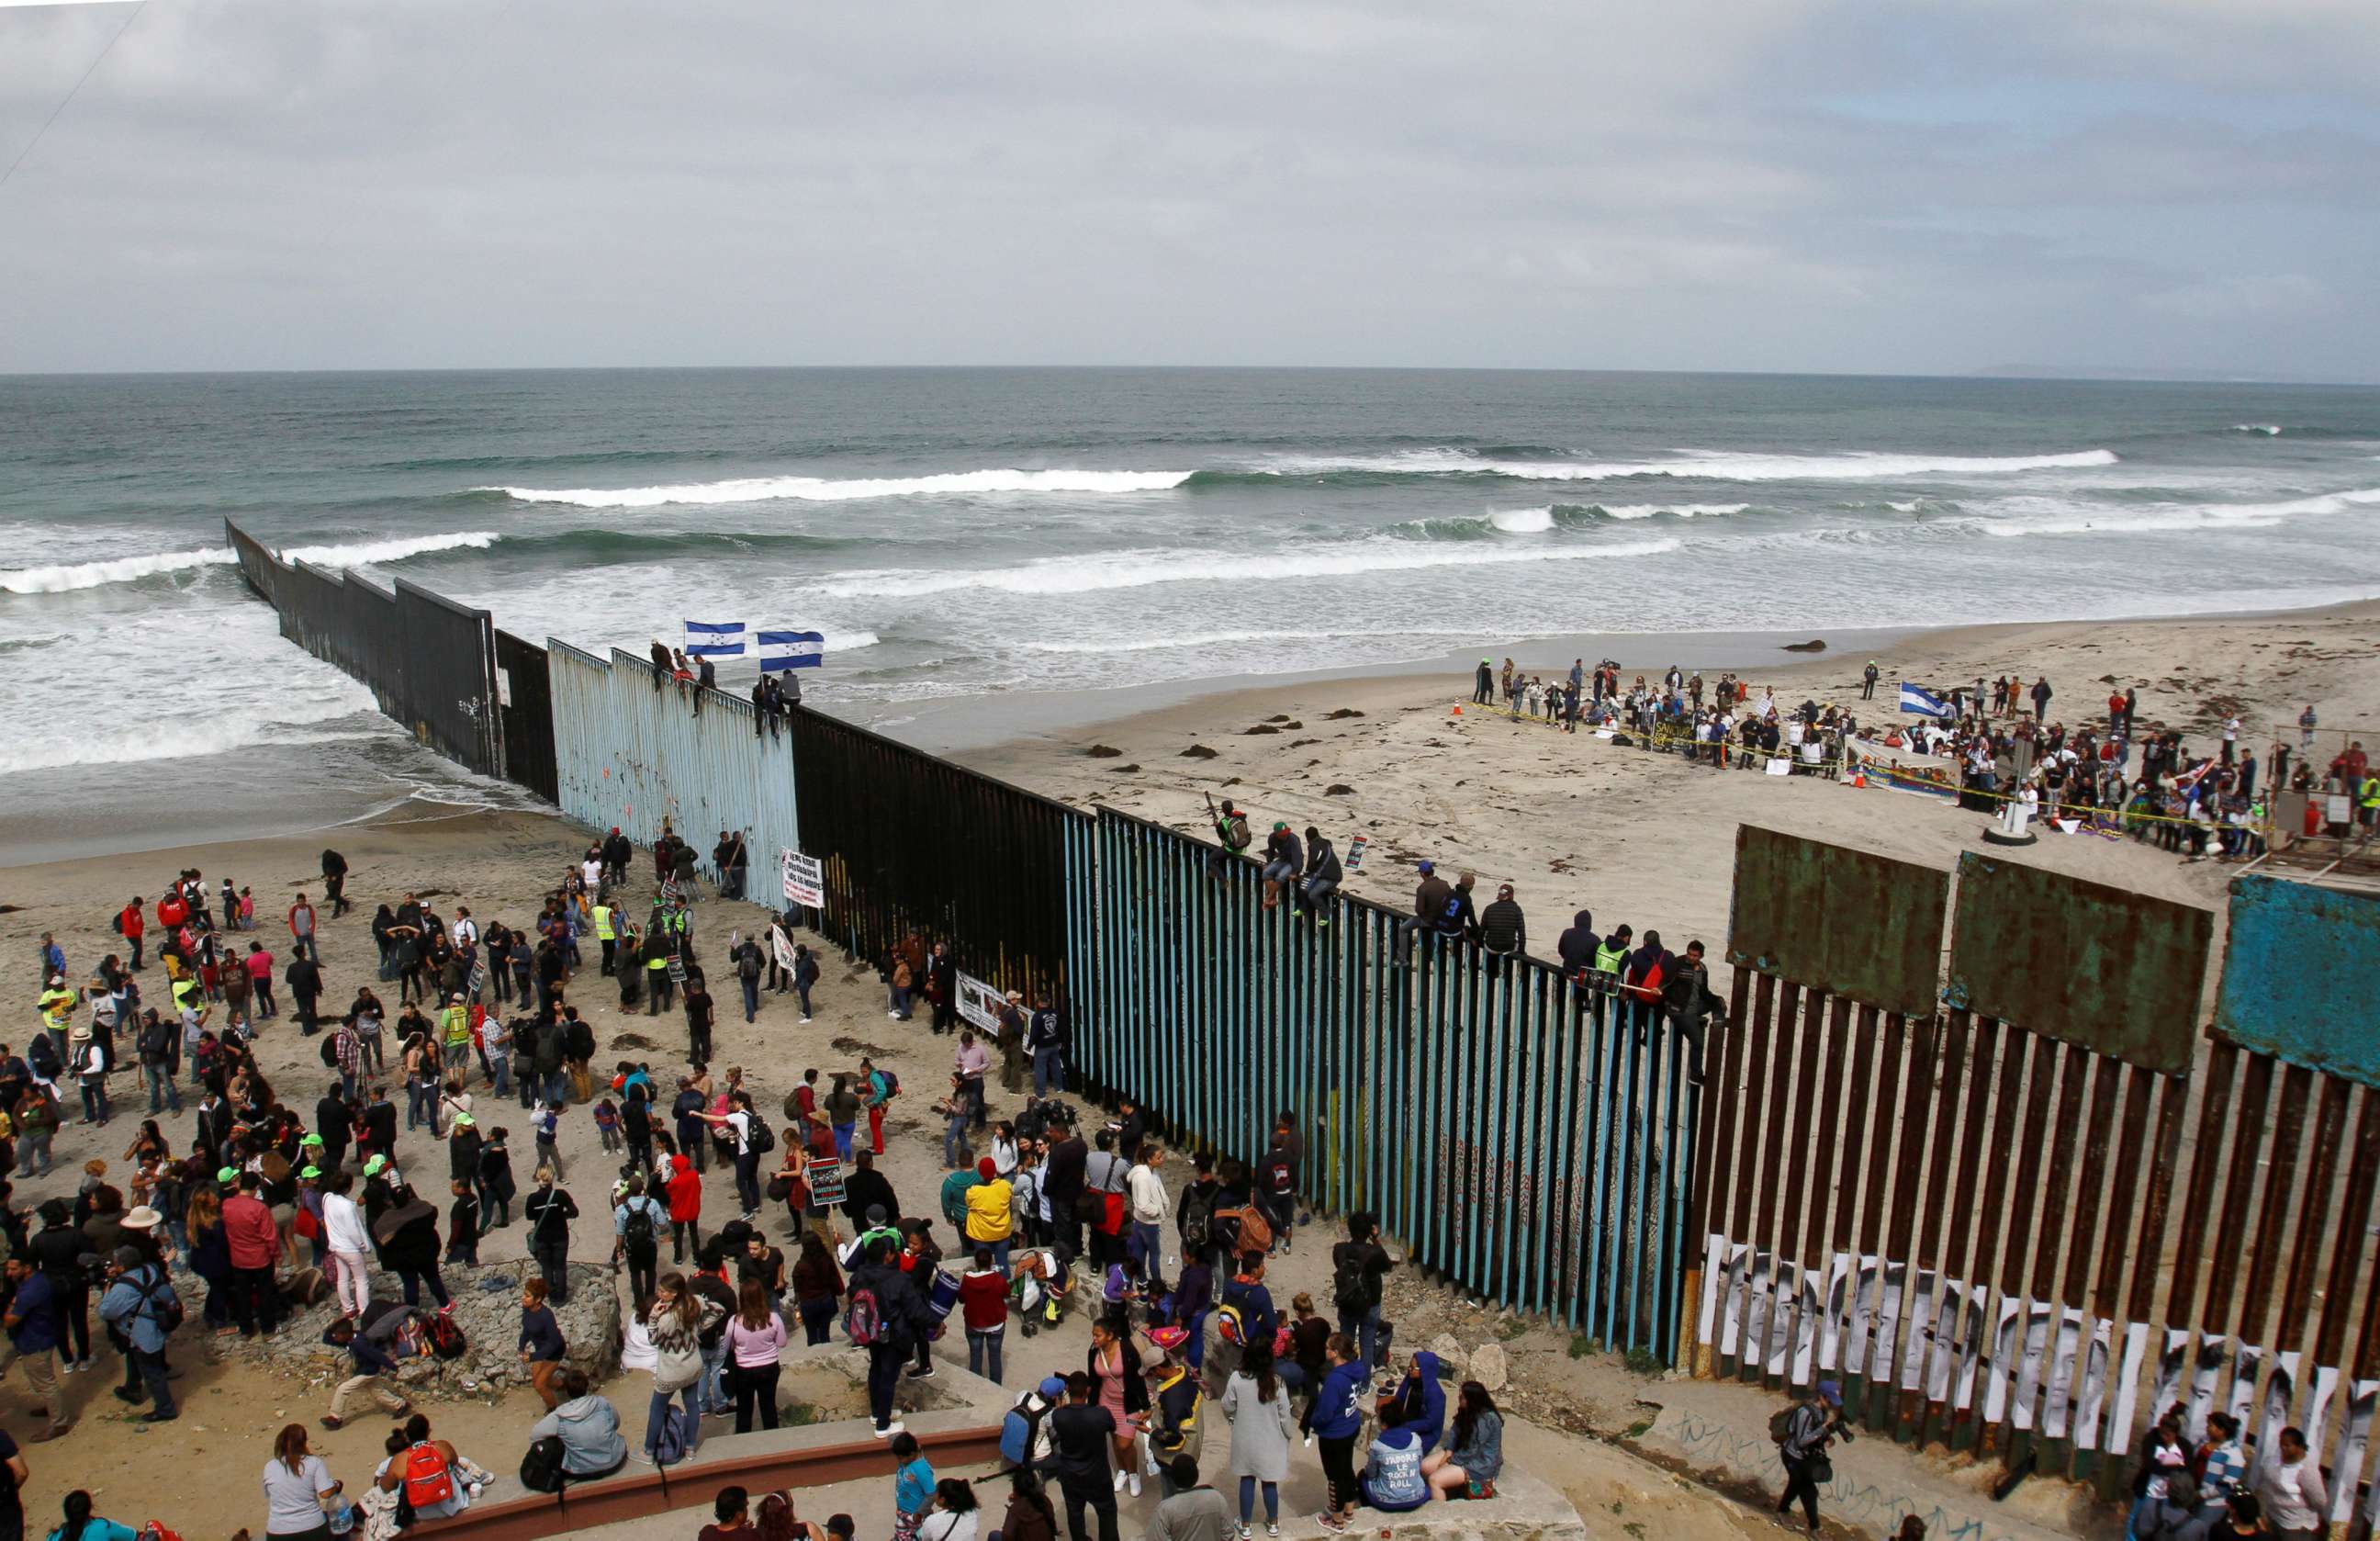 PHOTO: Members of a caravan of migrants from Central America and supporters gather on both sides of the border fence between Mexico and the U.S. as part of a demonstration, prior to preparations for an asylum request in the U.S., in Tijuana, Mexico.